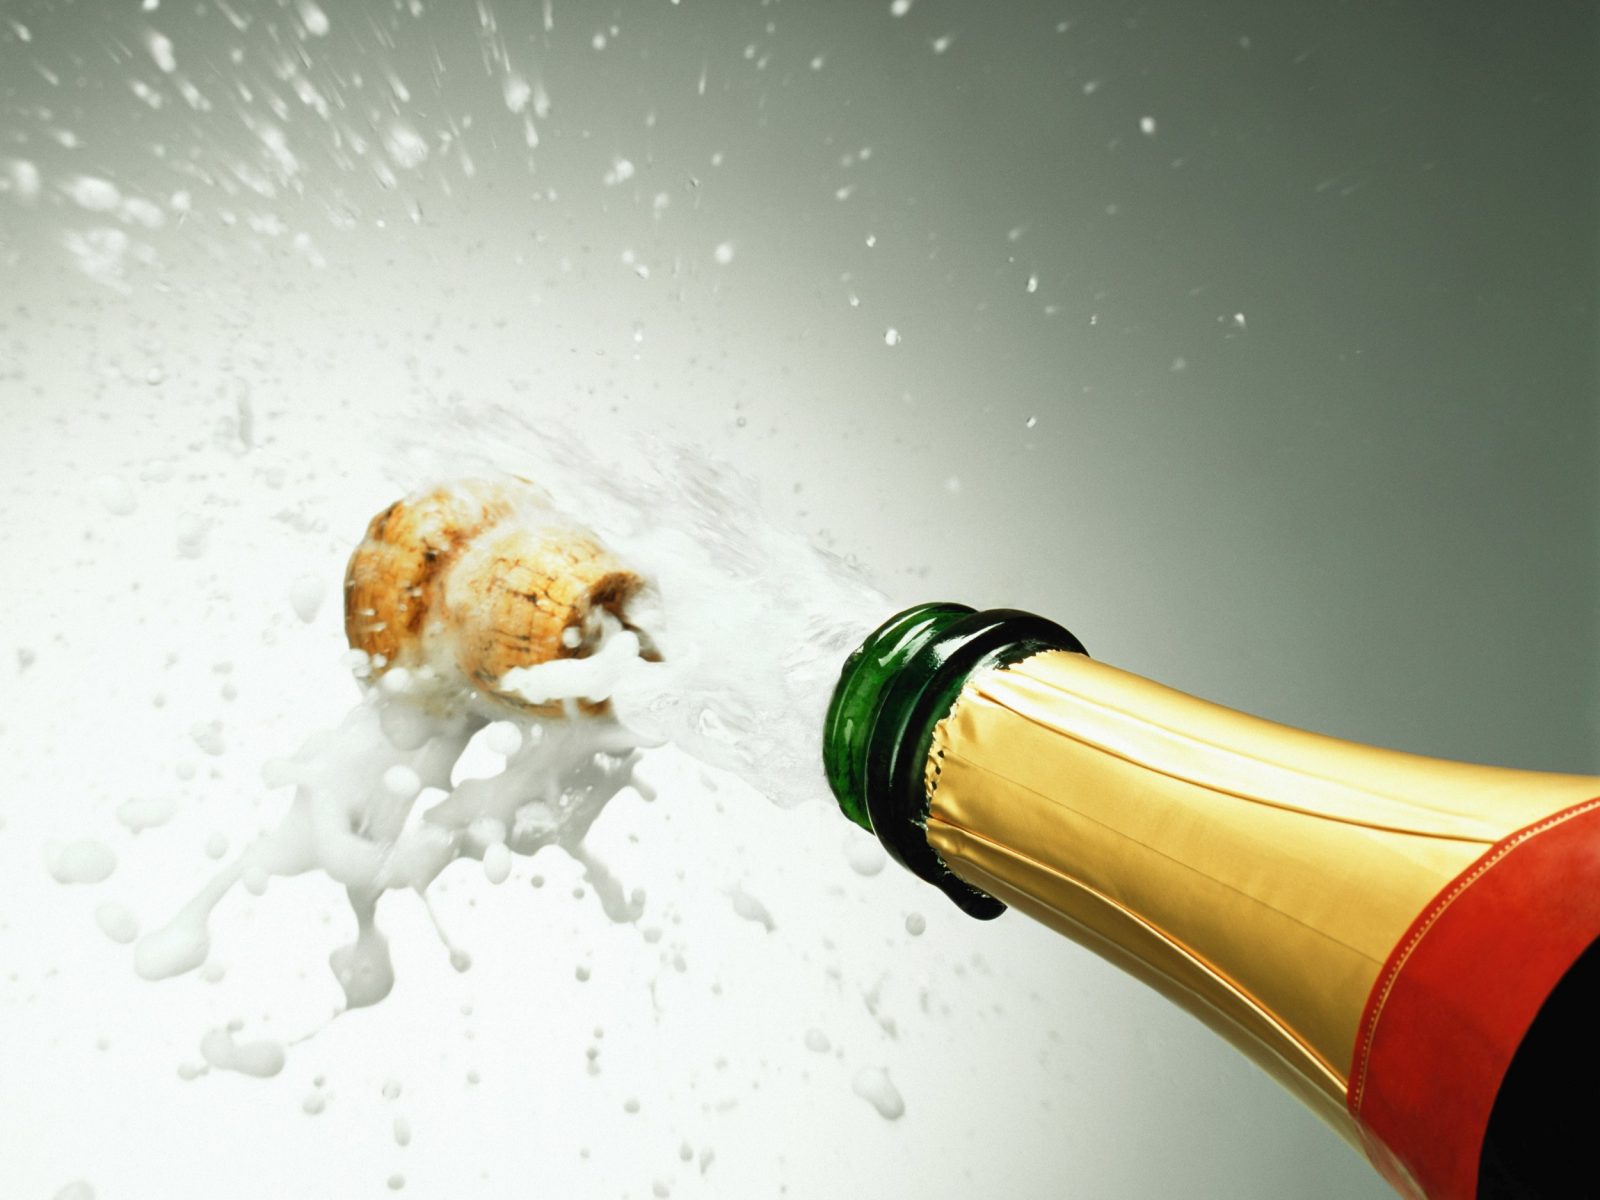 Can We Guess Your Age Based on the Life Skills You Have? popping champagne bottle